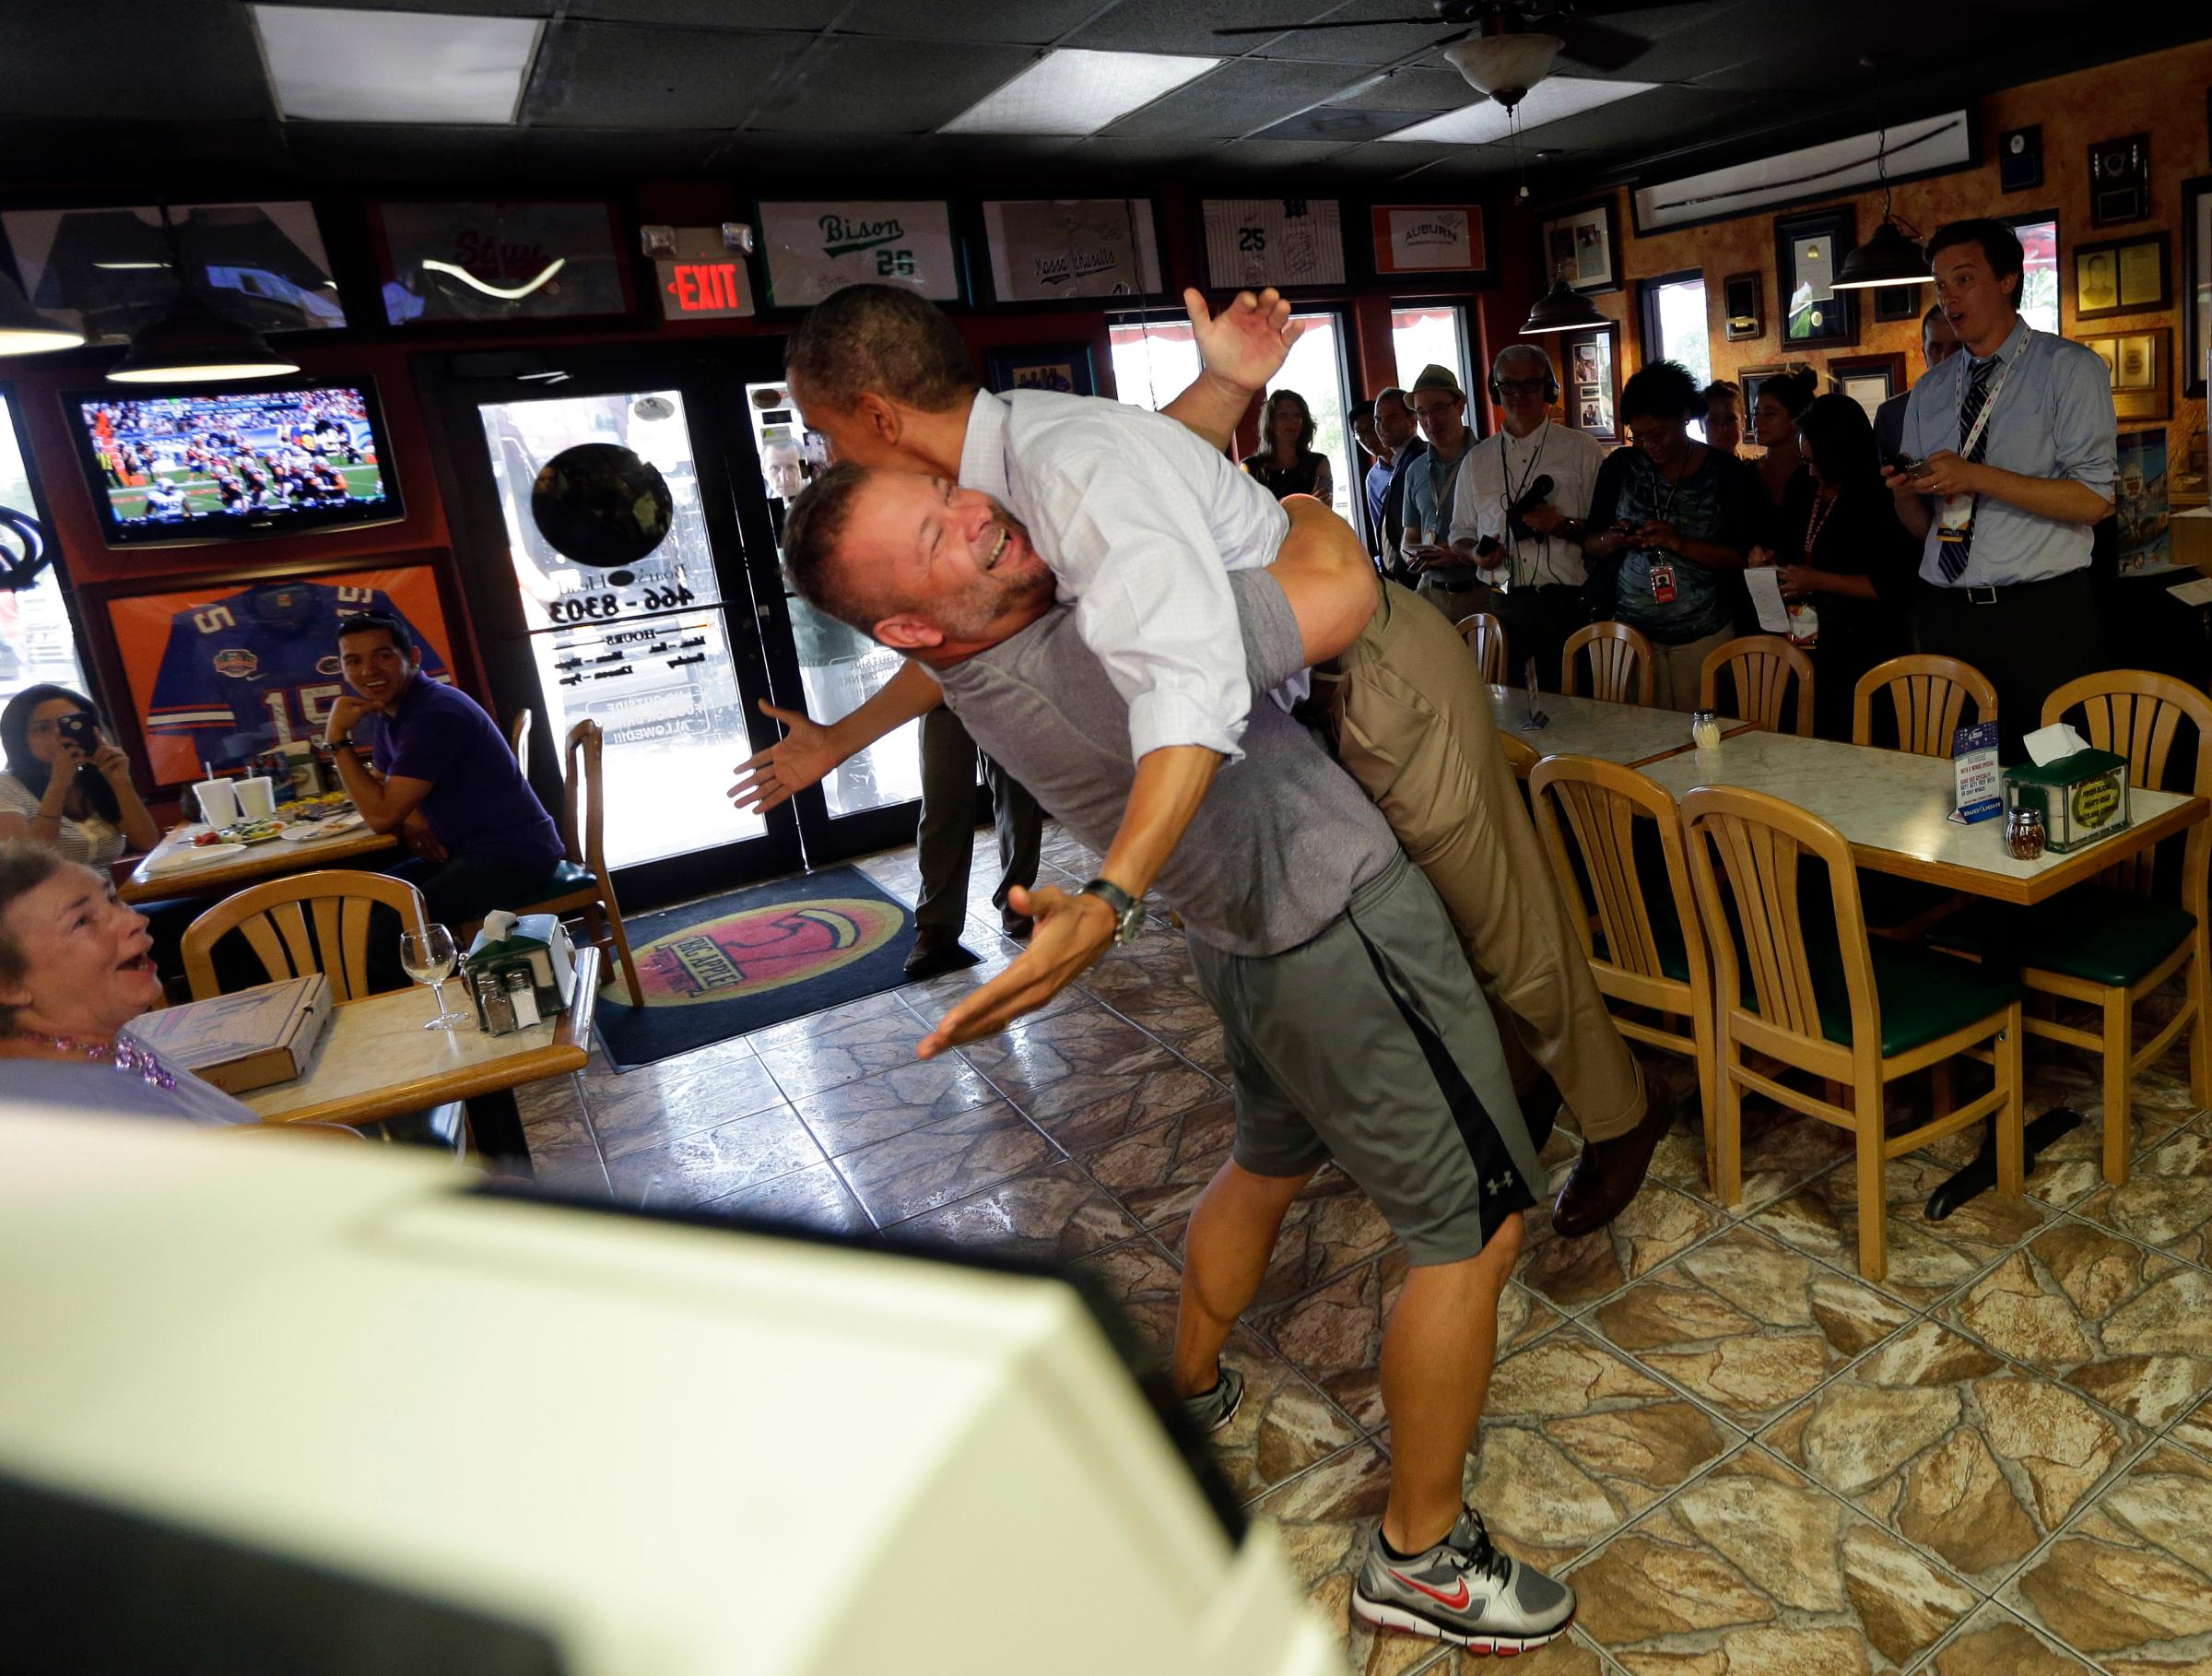 President Barack Obama, right, is picked-up and lifted off the ground by Scott Van Duzer, left, owner of Big Apple Pizza and Pasta Italian Restaurant during an unannounced stop, Sunday, Sept. 9, 2012, in Ft. Pierce, Fla. (AP Photo/Pablo Martinez Monsivais)